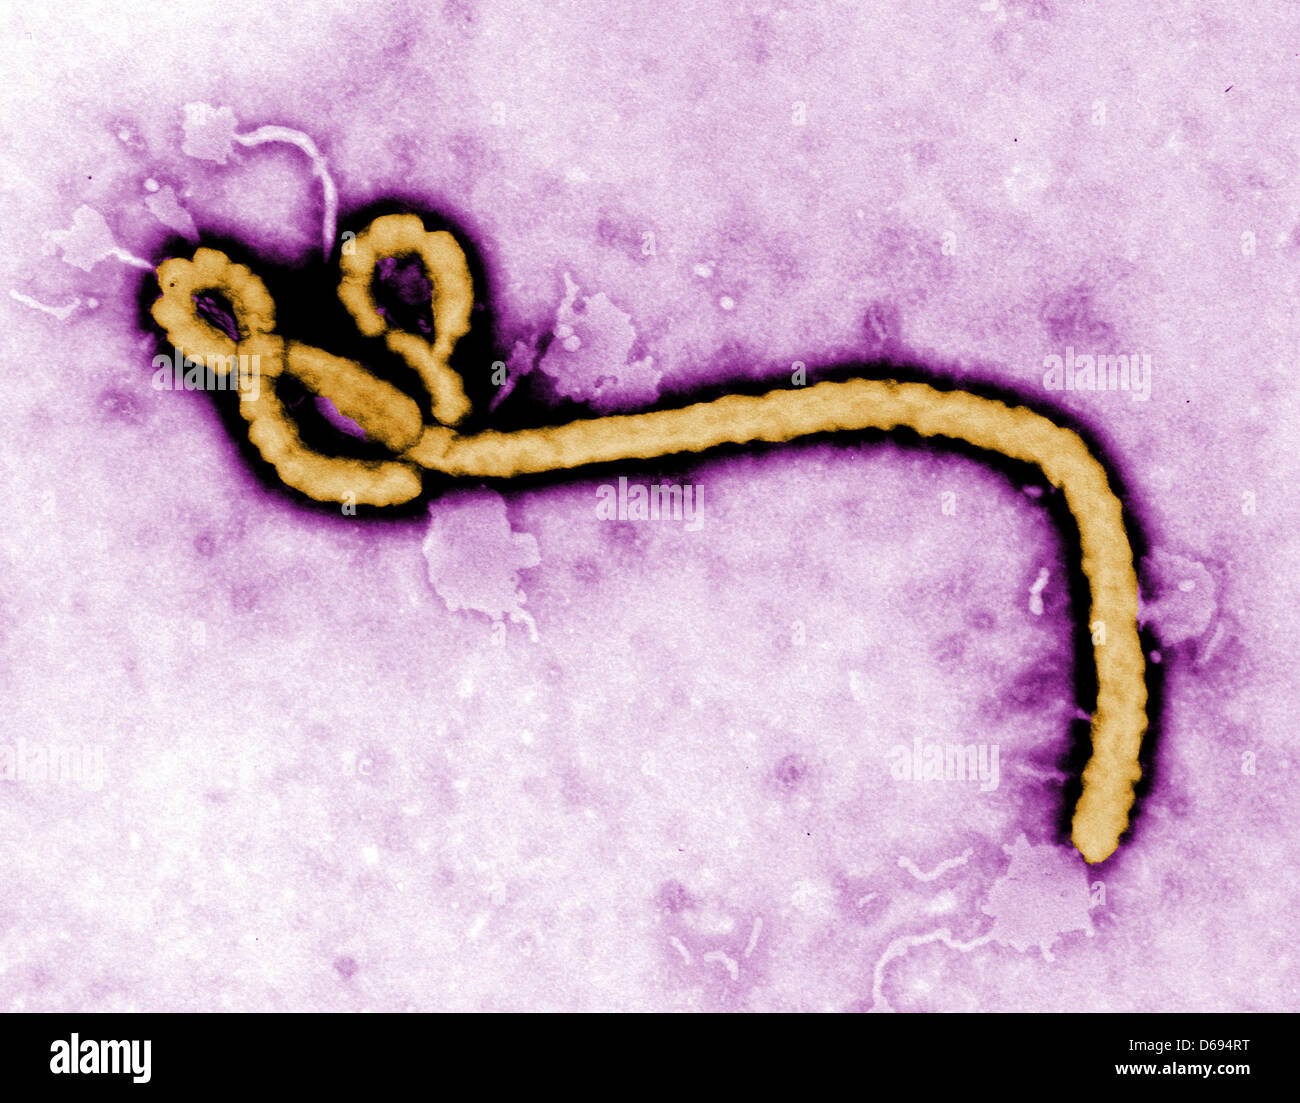 HANDOUT - Created by CDC microbiologist Frederick A. Murphy, this colorized transmission electron micrograph (TEM) revealed some of the ultrastructural morphology displayed by an Ebola virus virion (undated image). Photo: Frederick Murphy/CDC (MANDATORY CREDIT; zu dpa: 'Bisher 14 Tote bei neuem Ebola-Ausbruch in Uganda')  +++(c) dpa - Bildfunk+++ Stock Photo